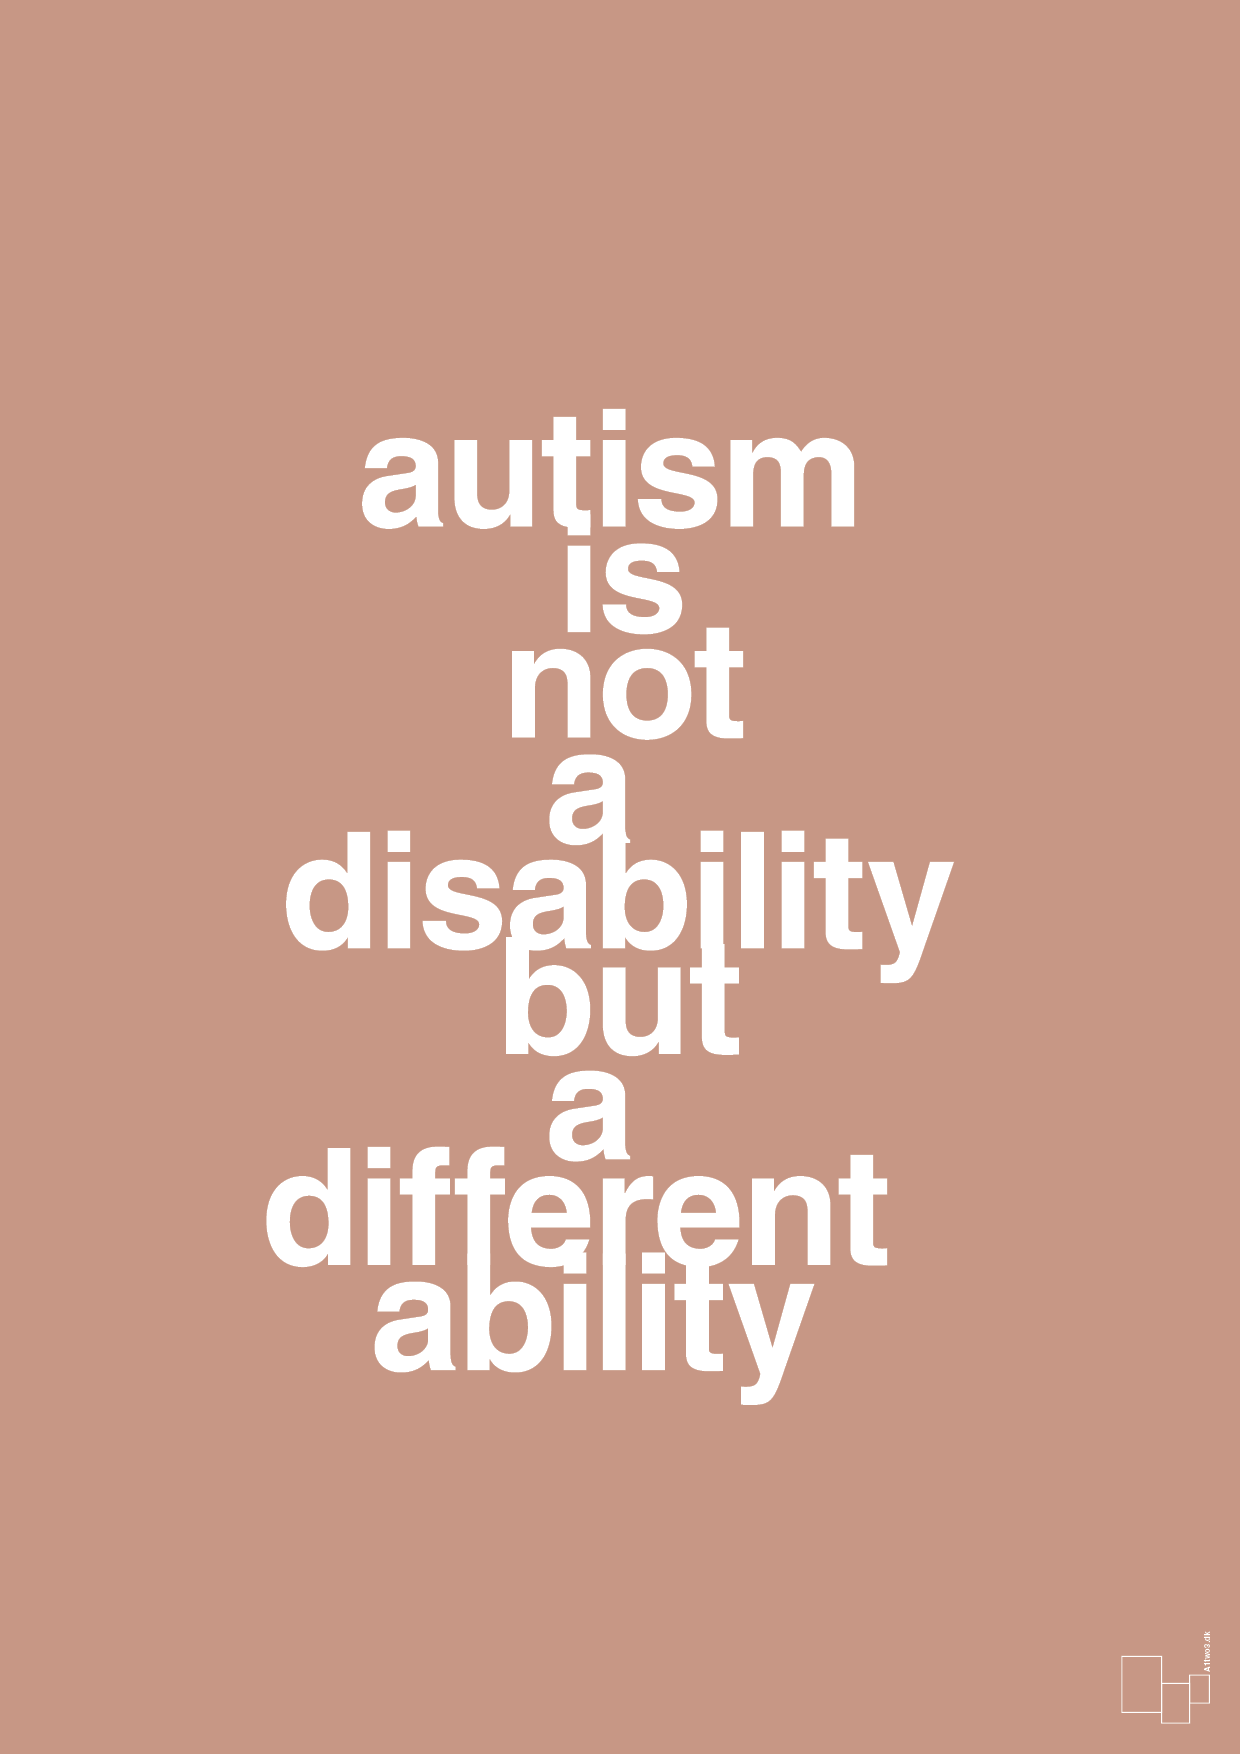 autism is not a disability but a different ability - Plakat med Samfund i Powder